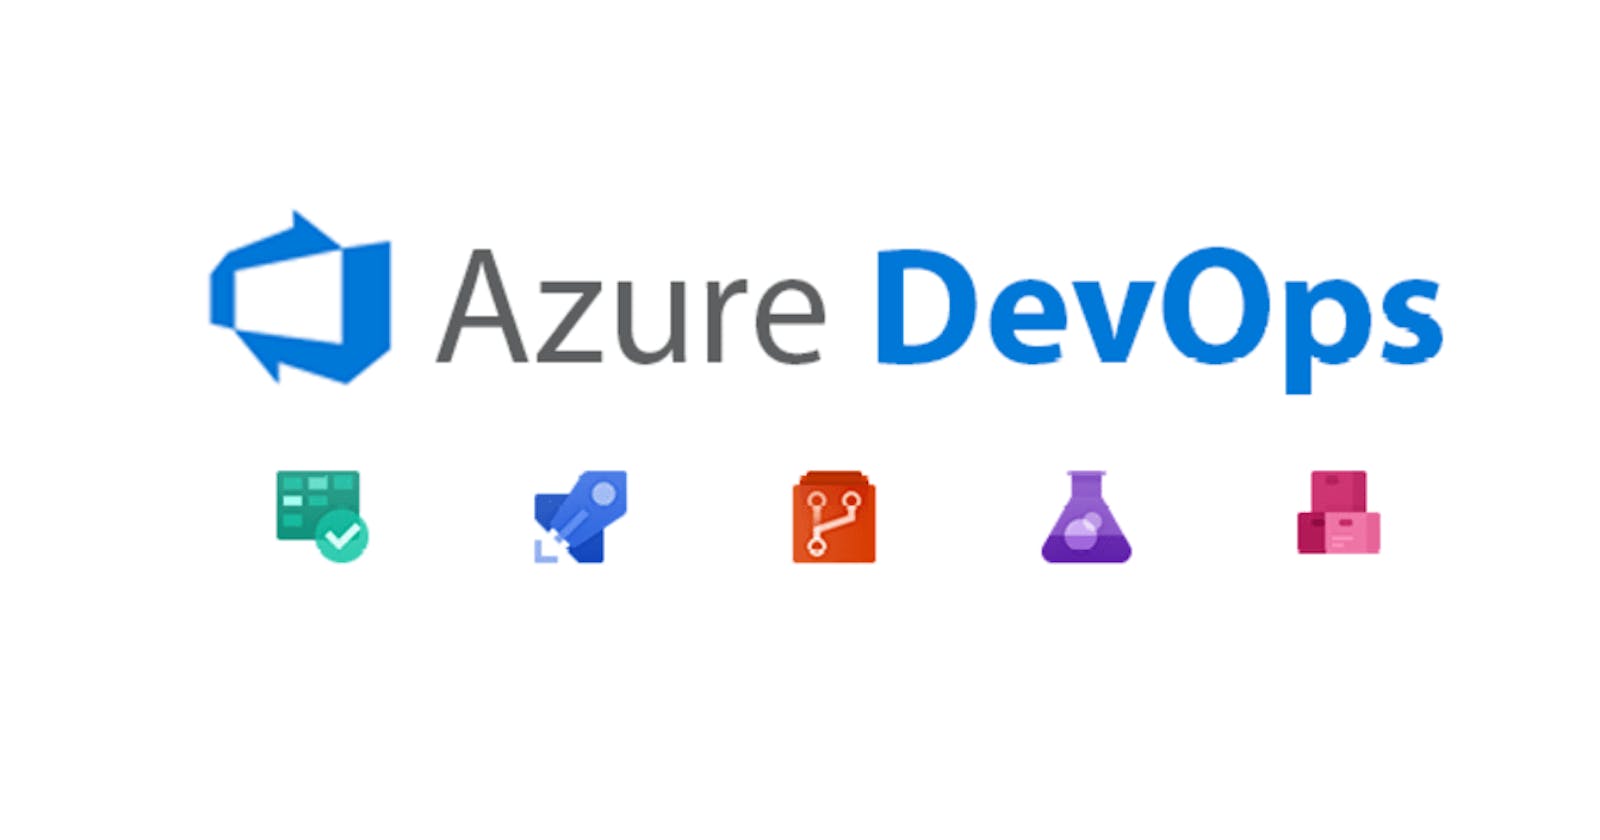 Managing Access Levels and Azure Repo Permissions in Azure DevOps